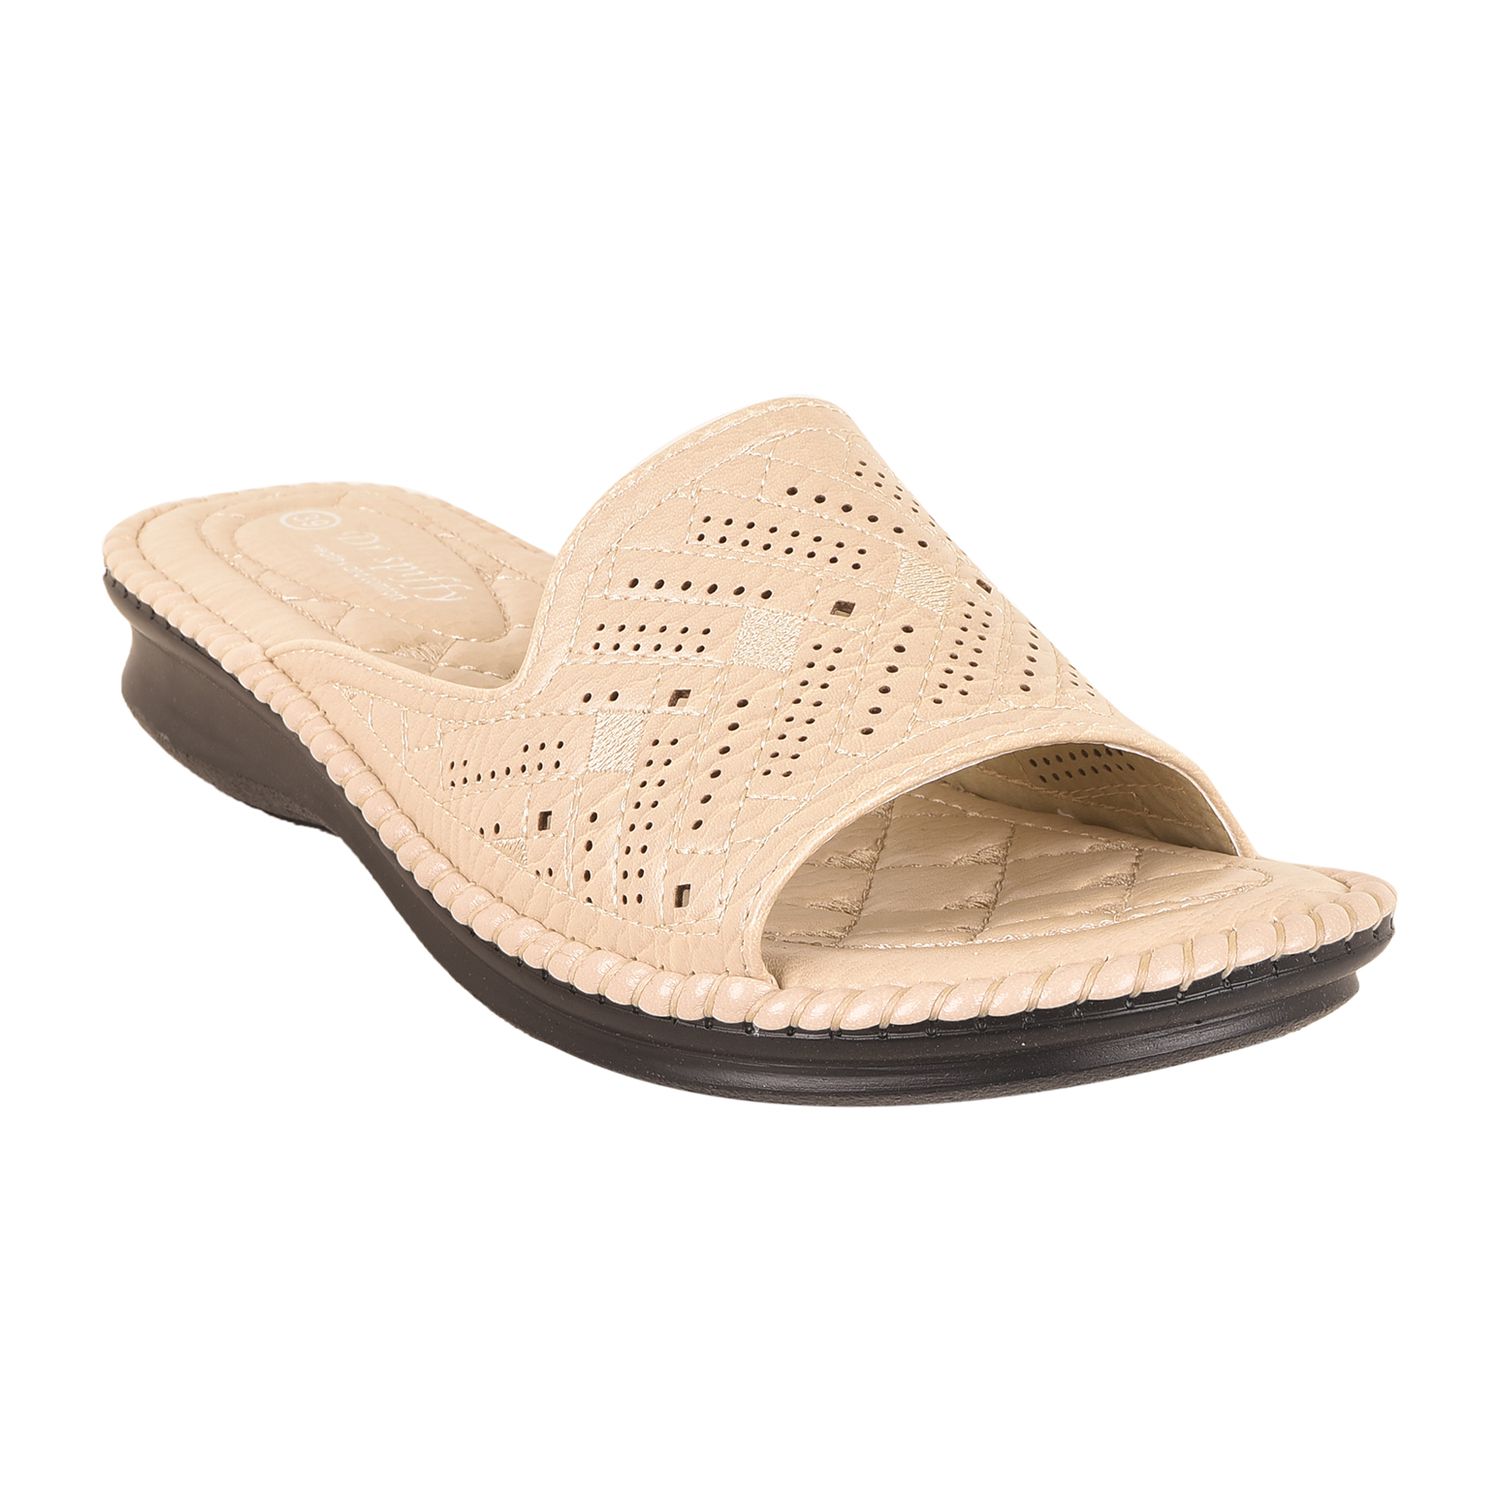 Shoeholic Beige Slippers Price in India- Buy Shoeholic Beige Slippers ...